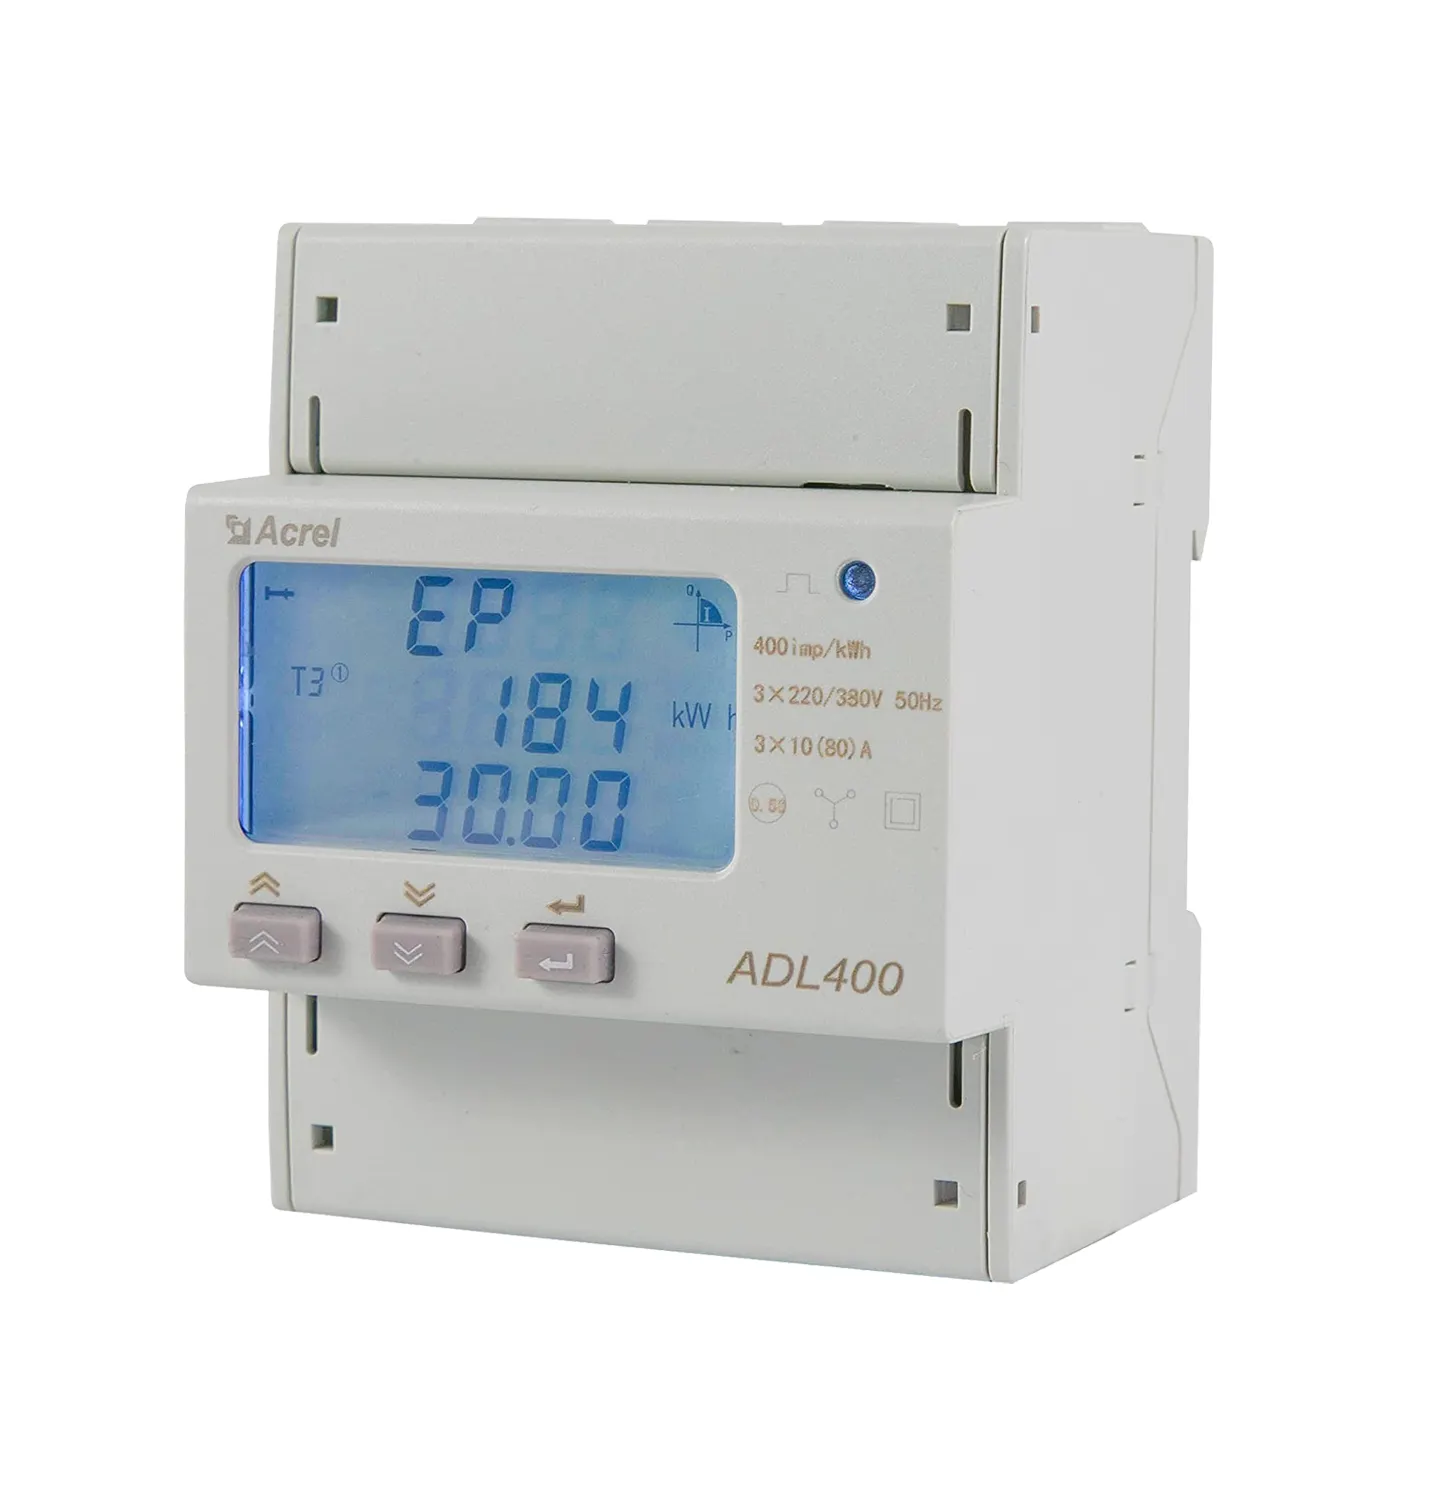 Acrel ADL400 ac 3 phase smart energy meter RS485 electronic energy meter for EV charger electricity metering MID certificate